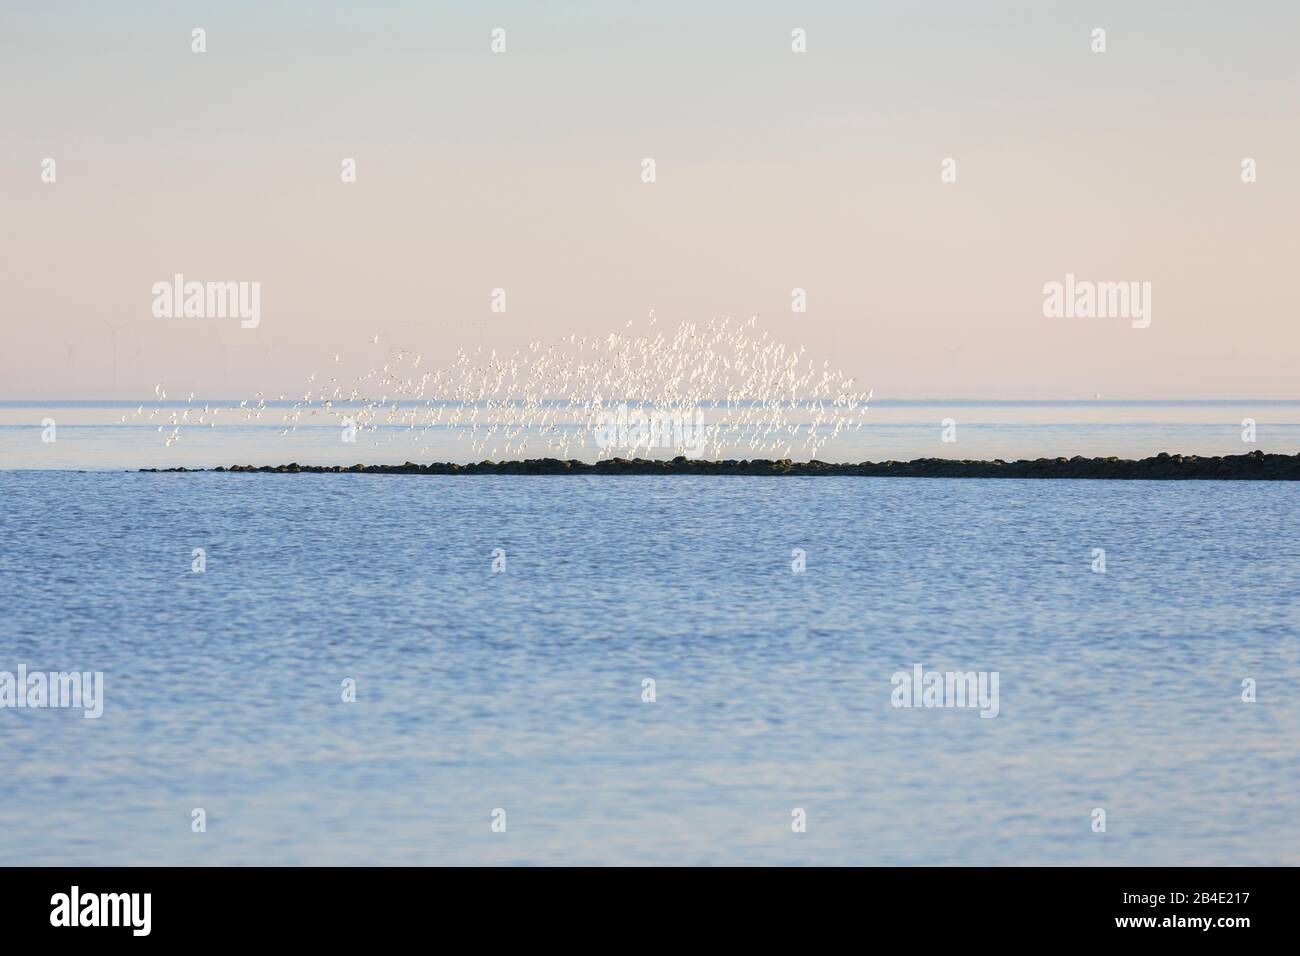 Europe, Germany, Lower Saxony, Otterndorf, A flock of wintering Sanderlinge (Calidris alba) in the morning flight over the Elbe estuary, Here the birds show the white plumage of their ventral side, Stock Photo